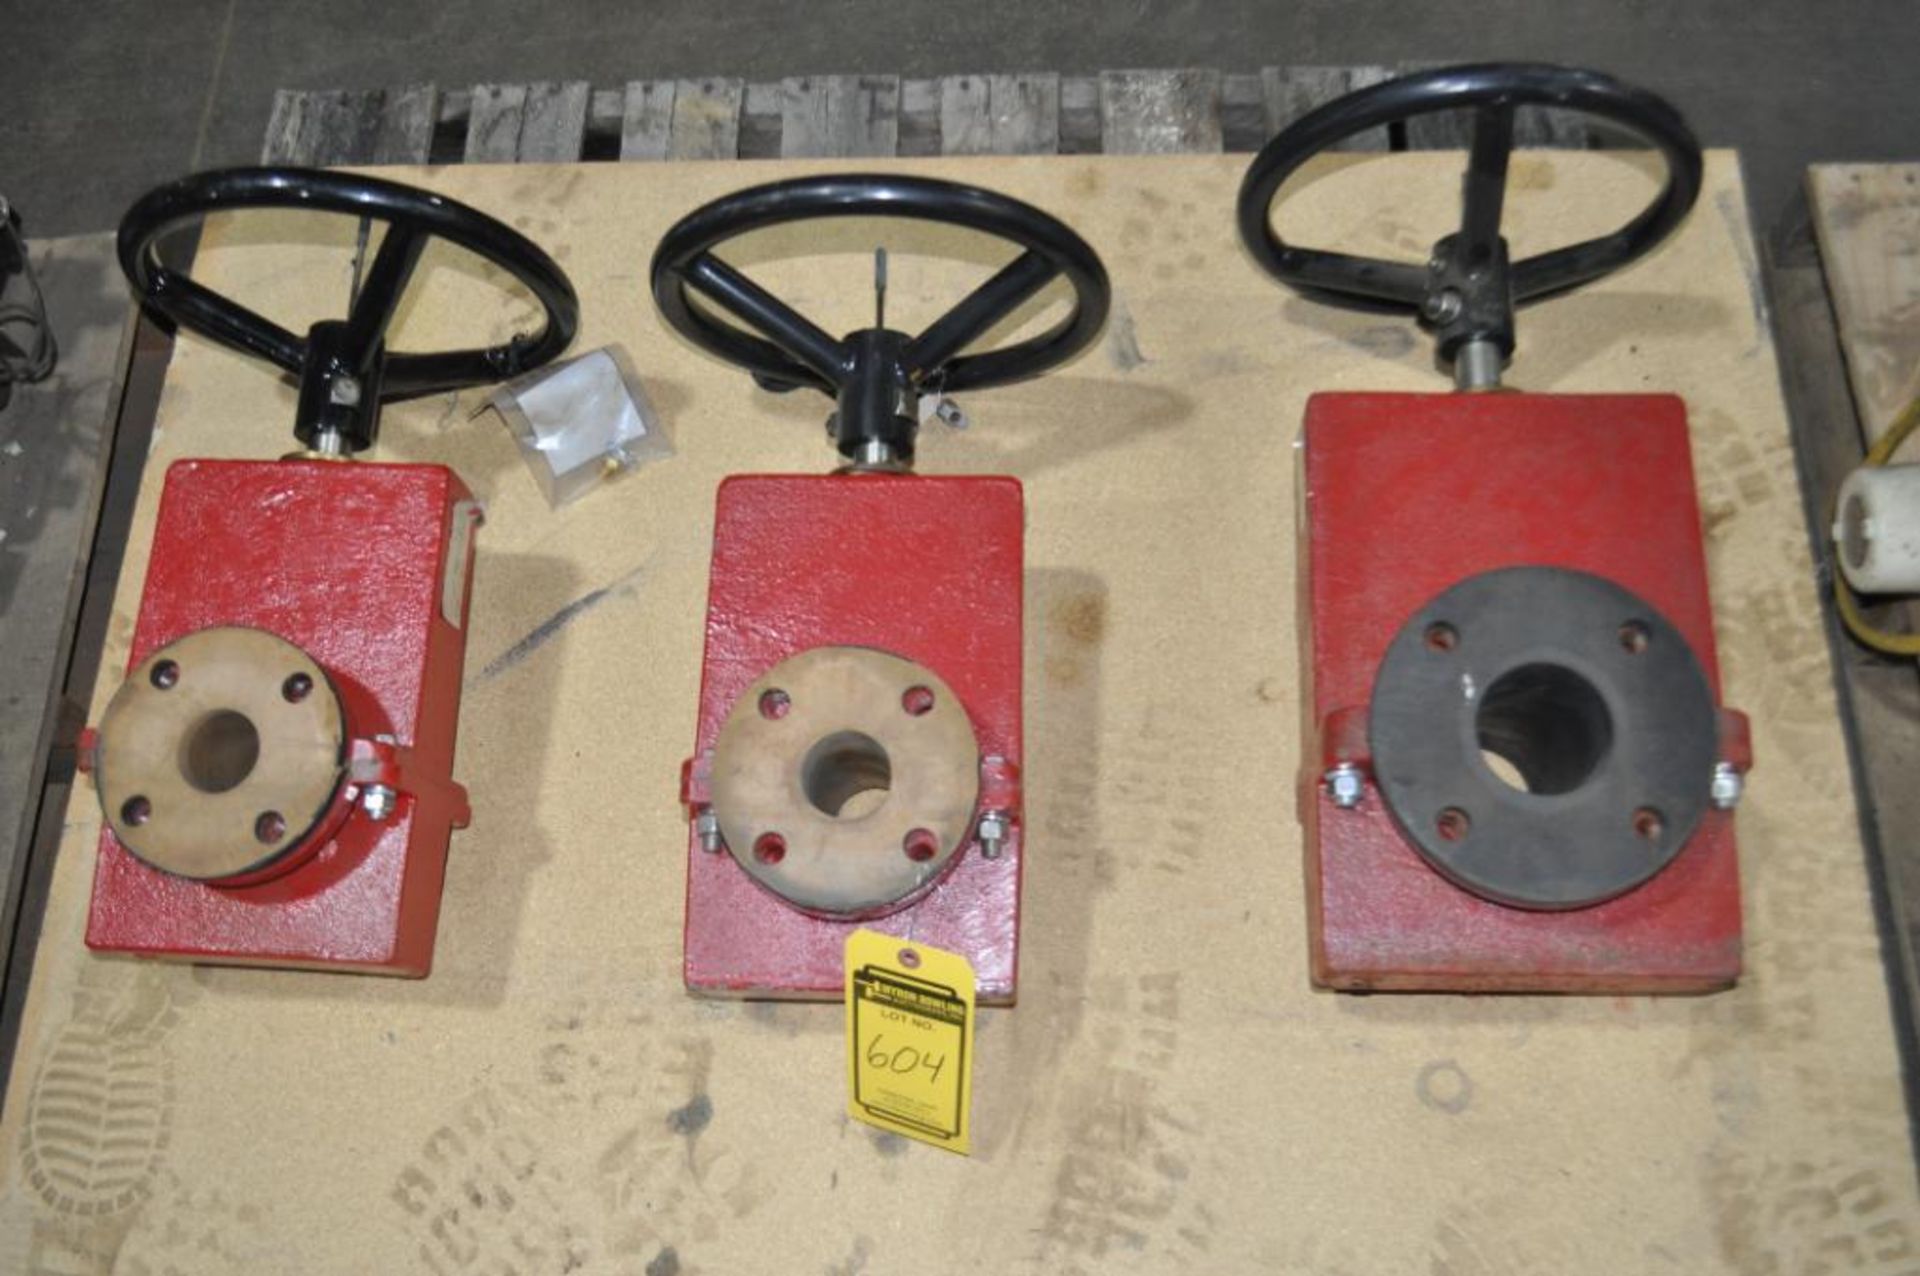 (3X) RED VALVE COMPANY INC. PINCH VALVES: (2) SIZE: 2'', (1) SIZE: 3'', SERIES 75